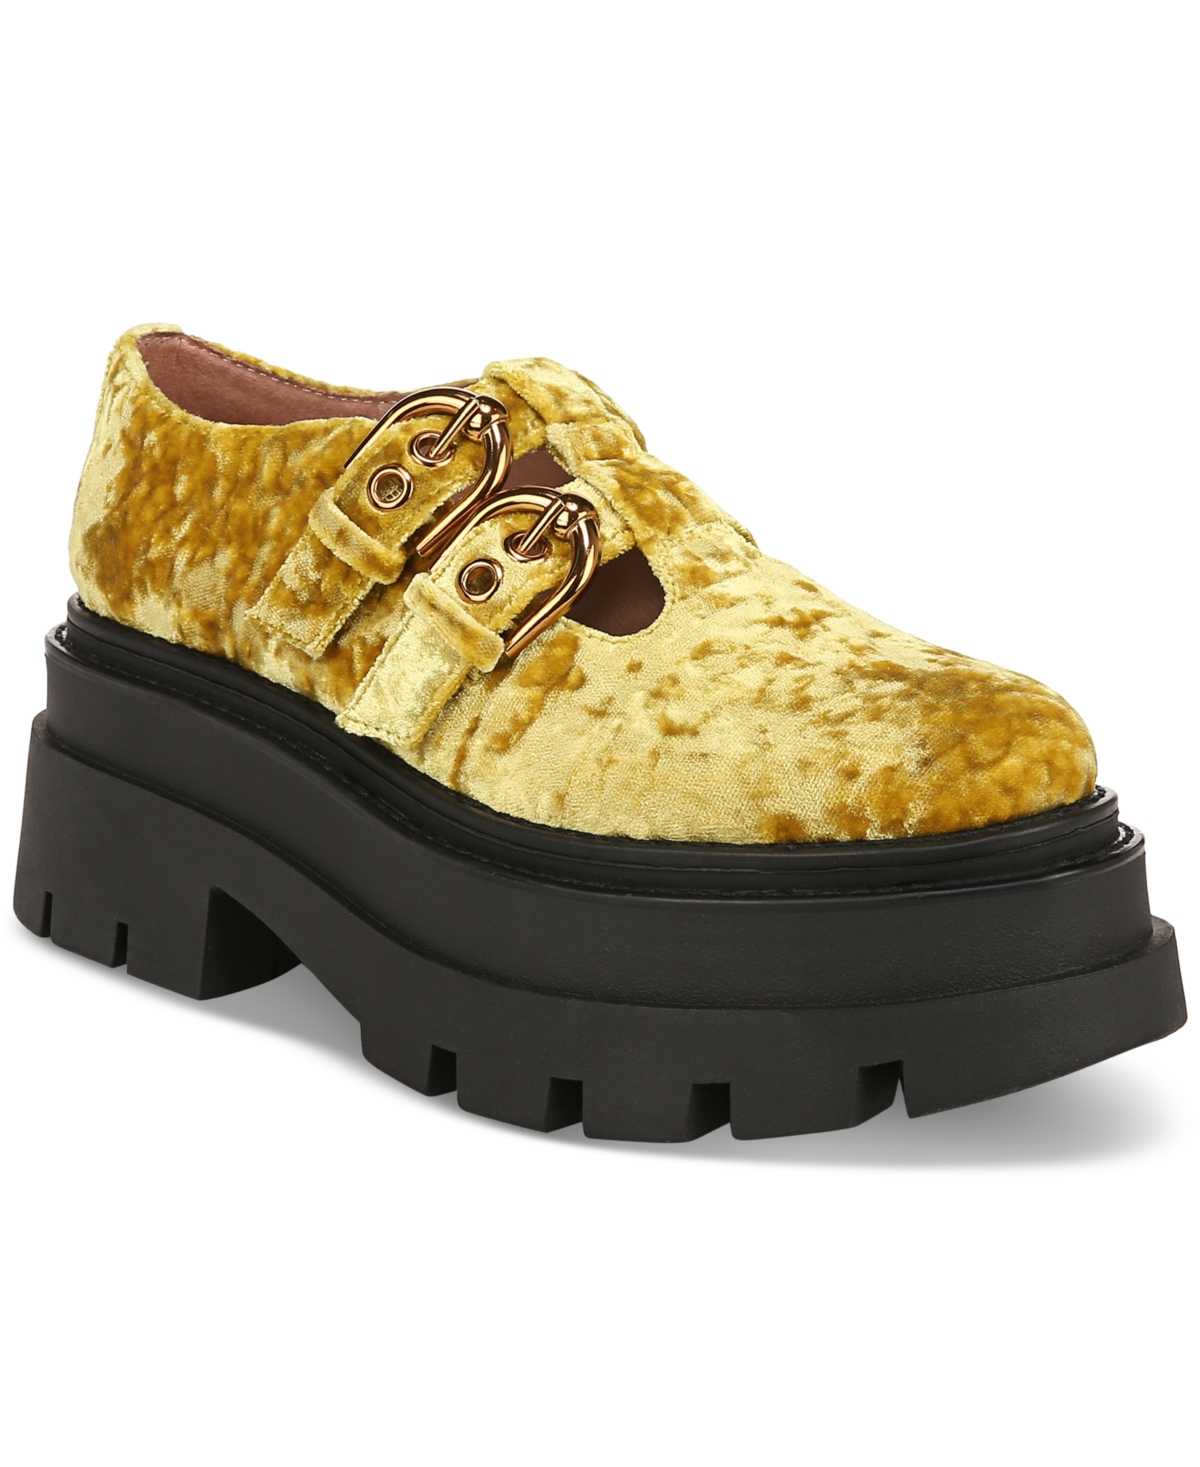 Circus Ny Women's Bryce T-strap Mary Jane Lug Platform Loafers In Sun Yellow Crushed Velvet